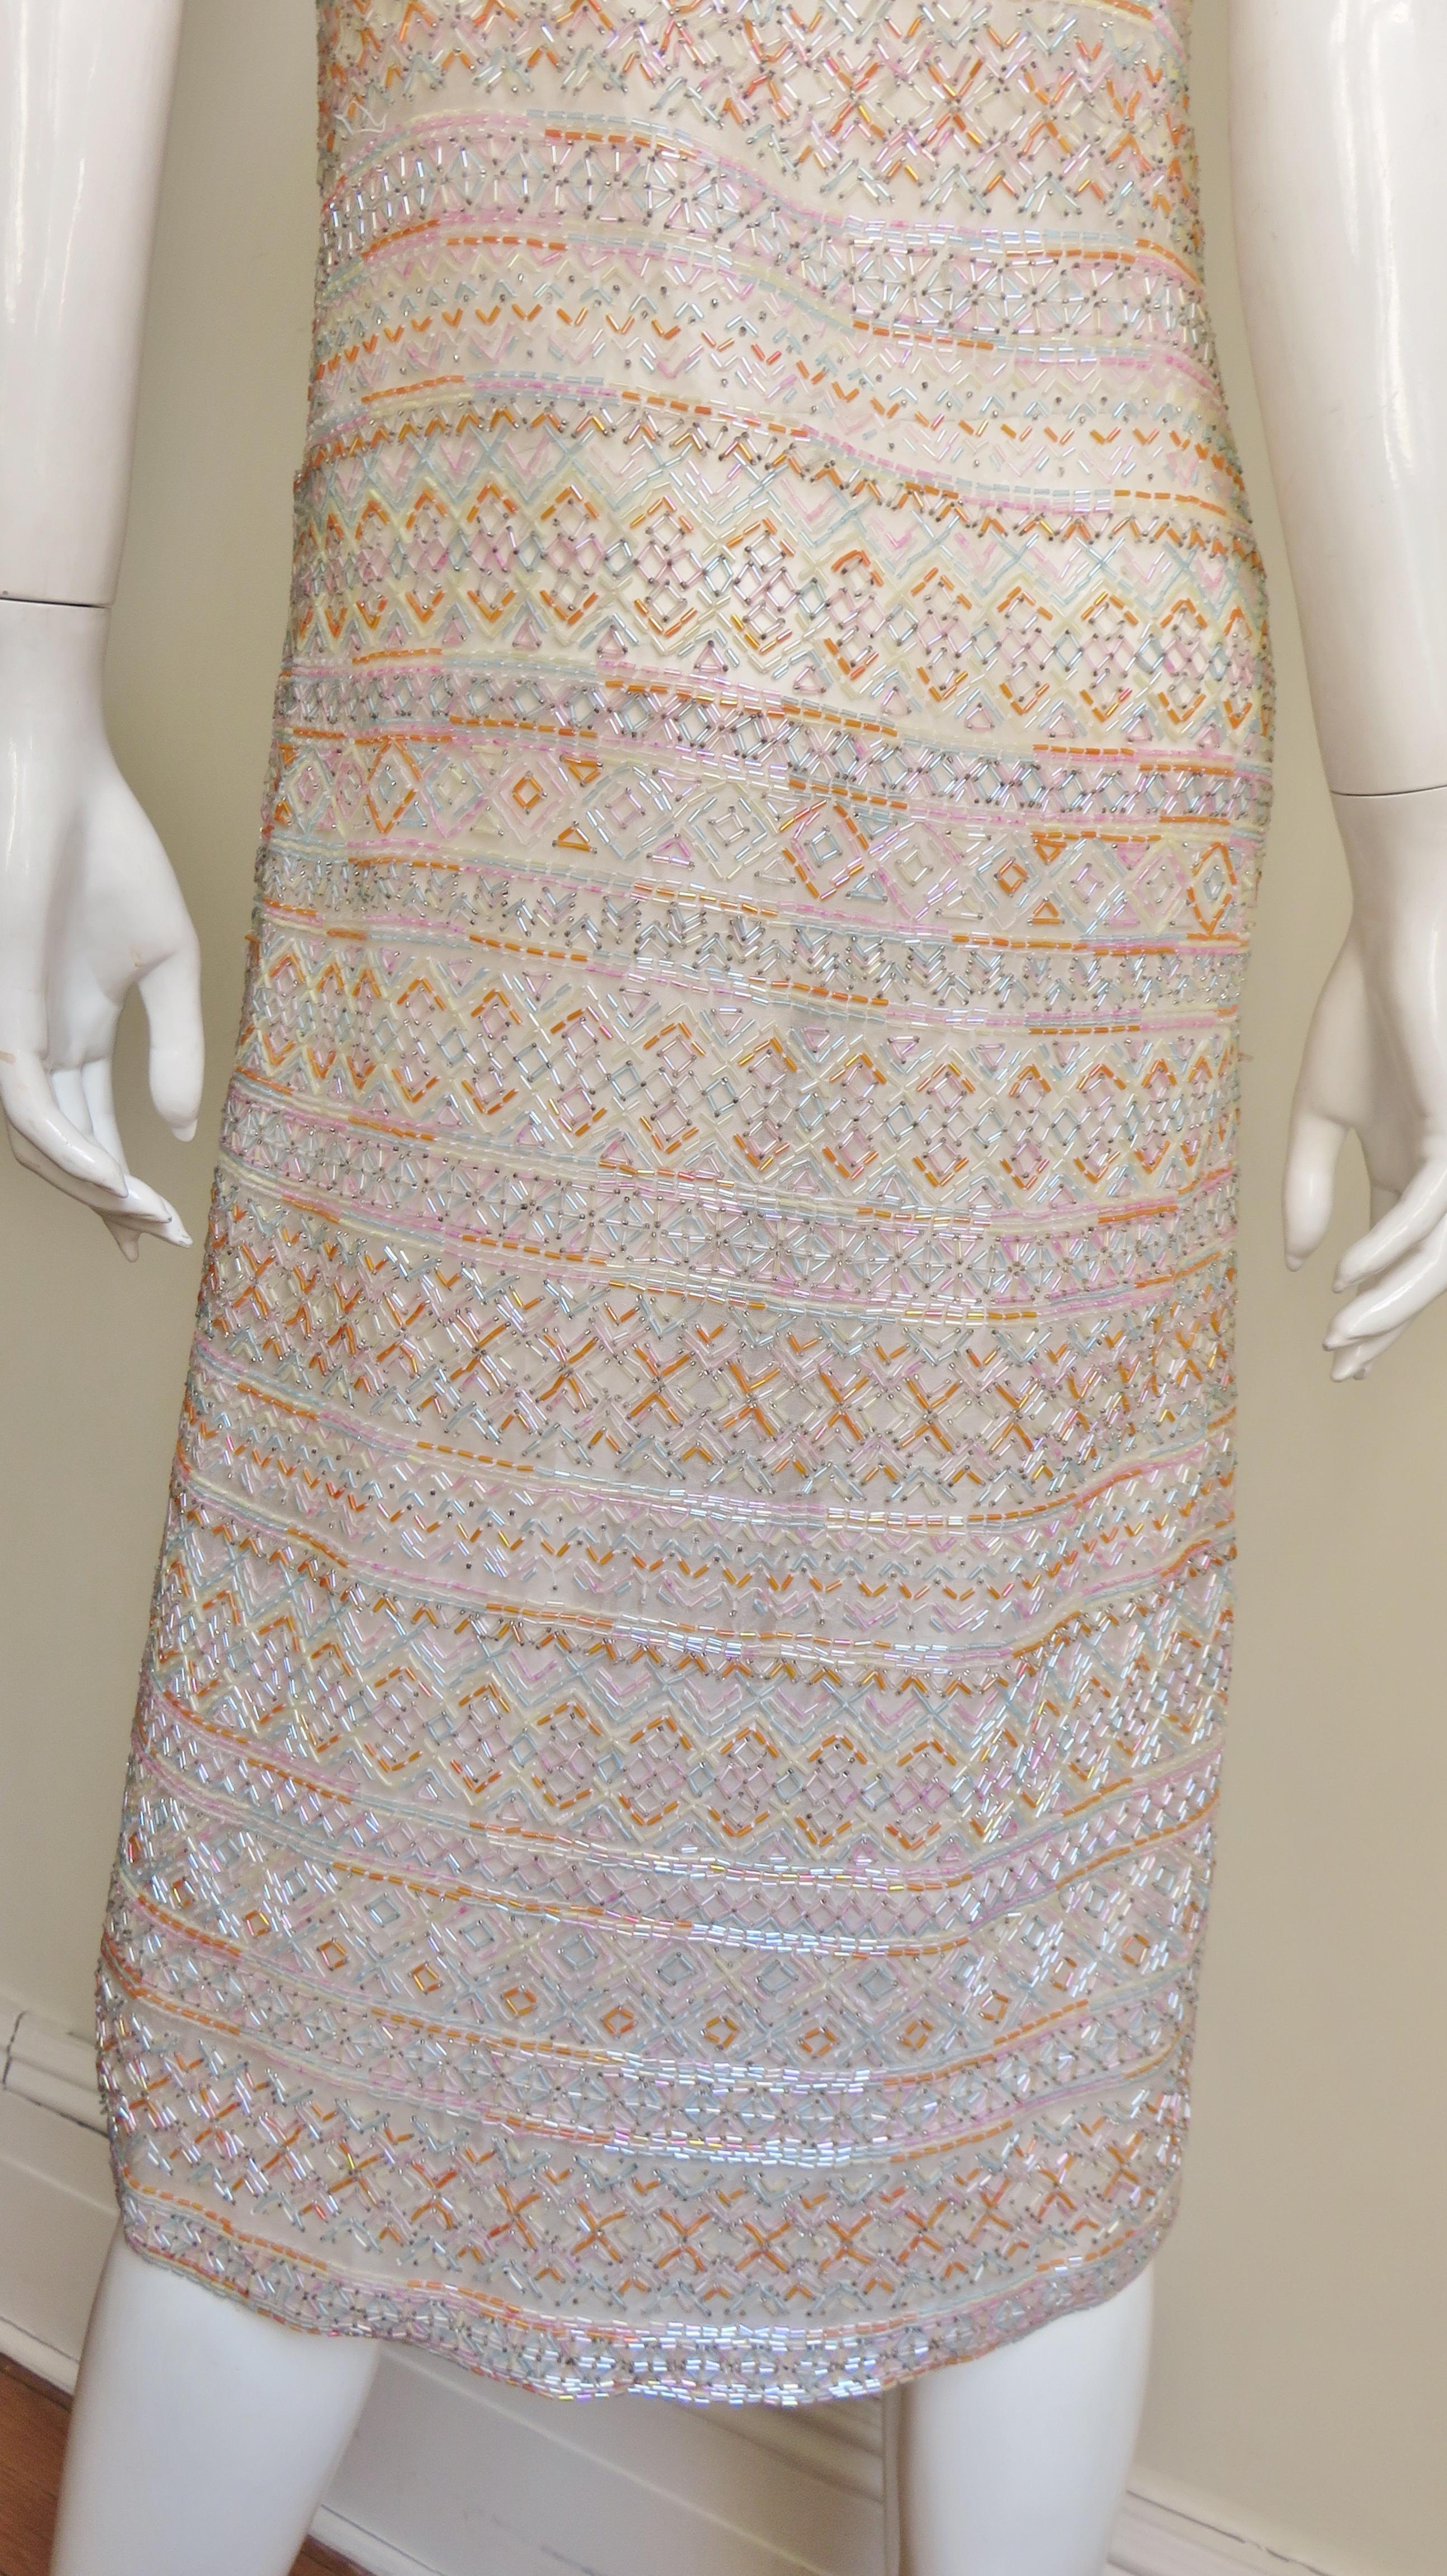  Halston 1970s Documented Beaded Dress  For Sale 6